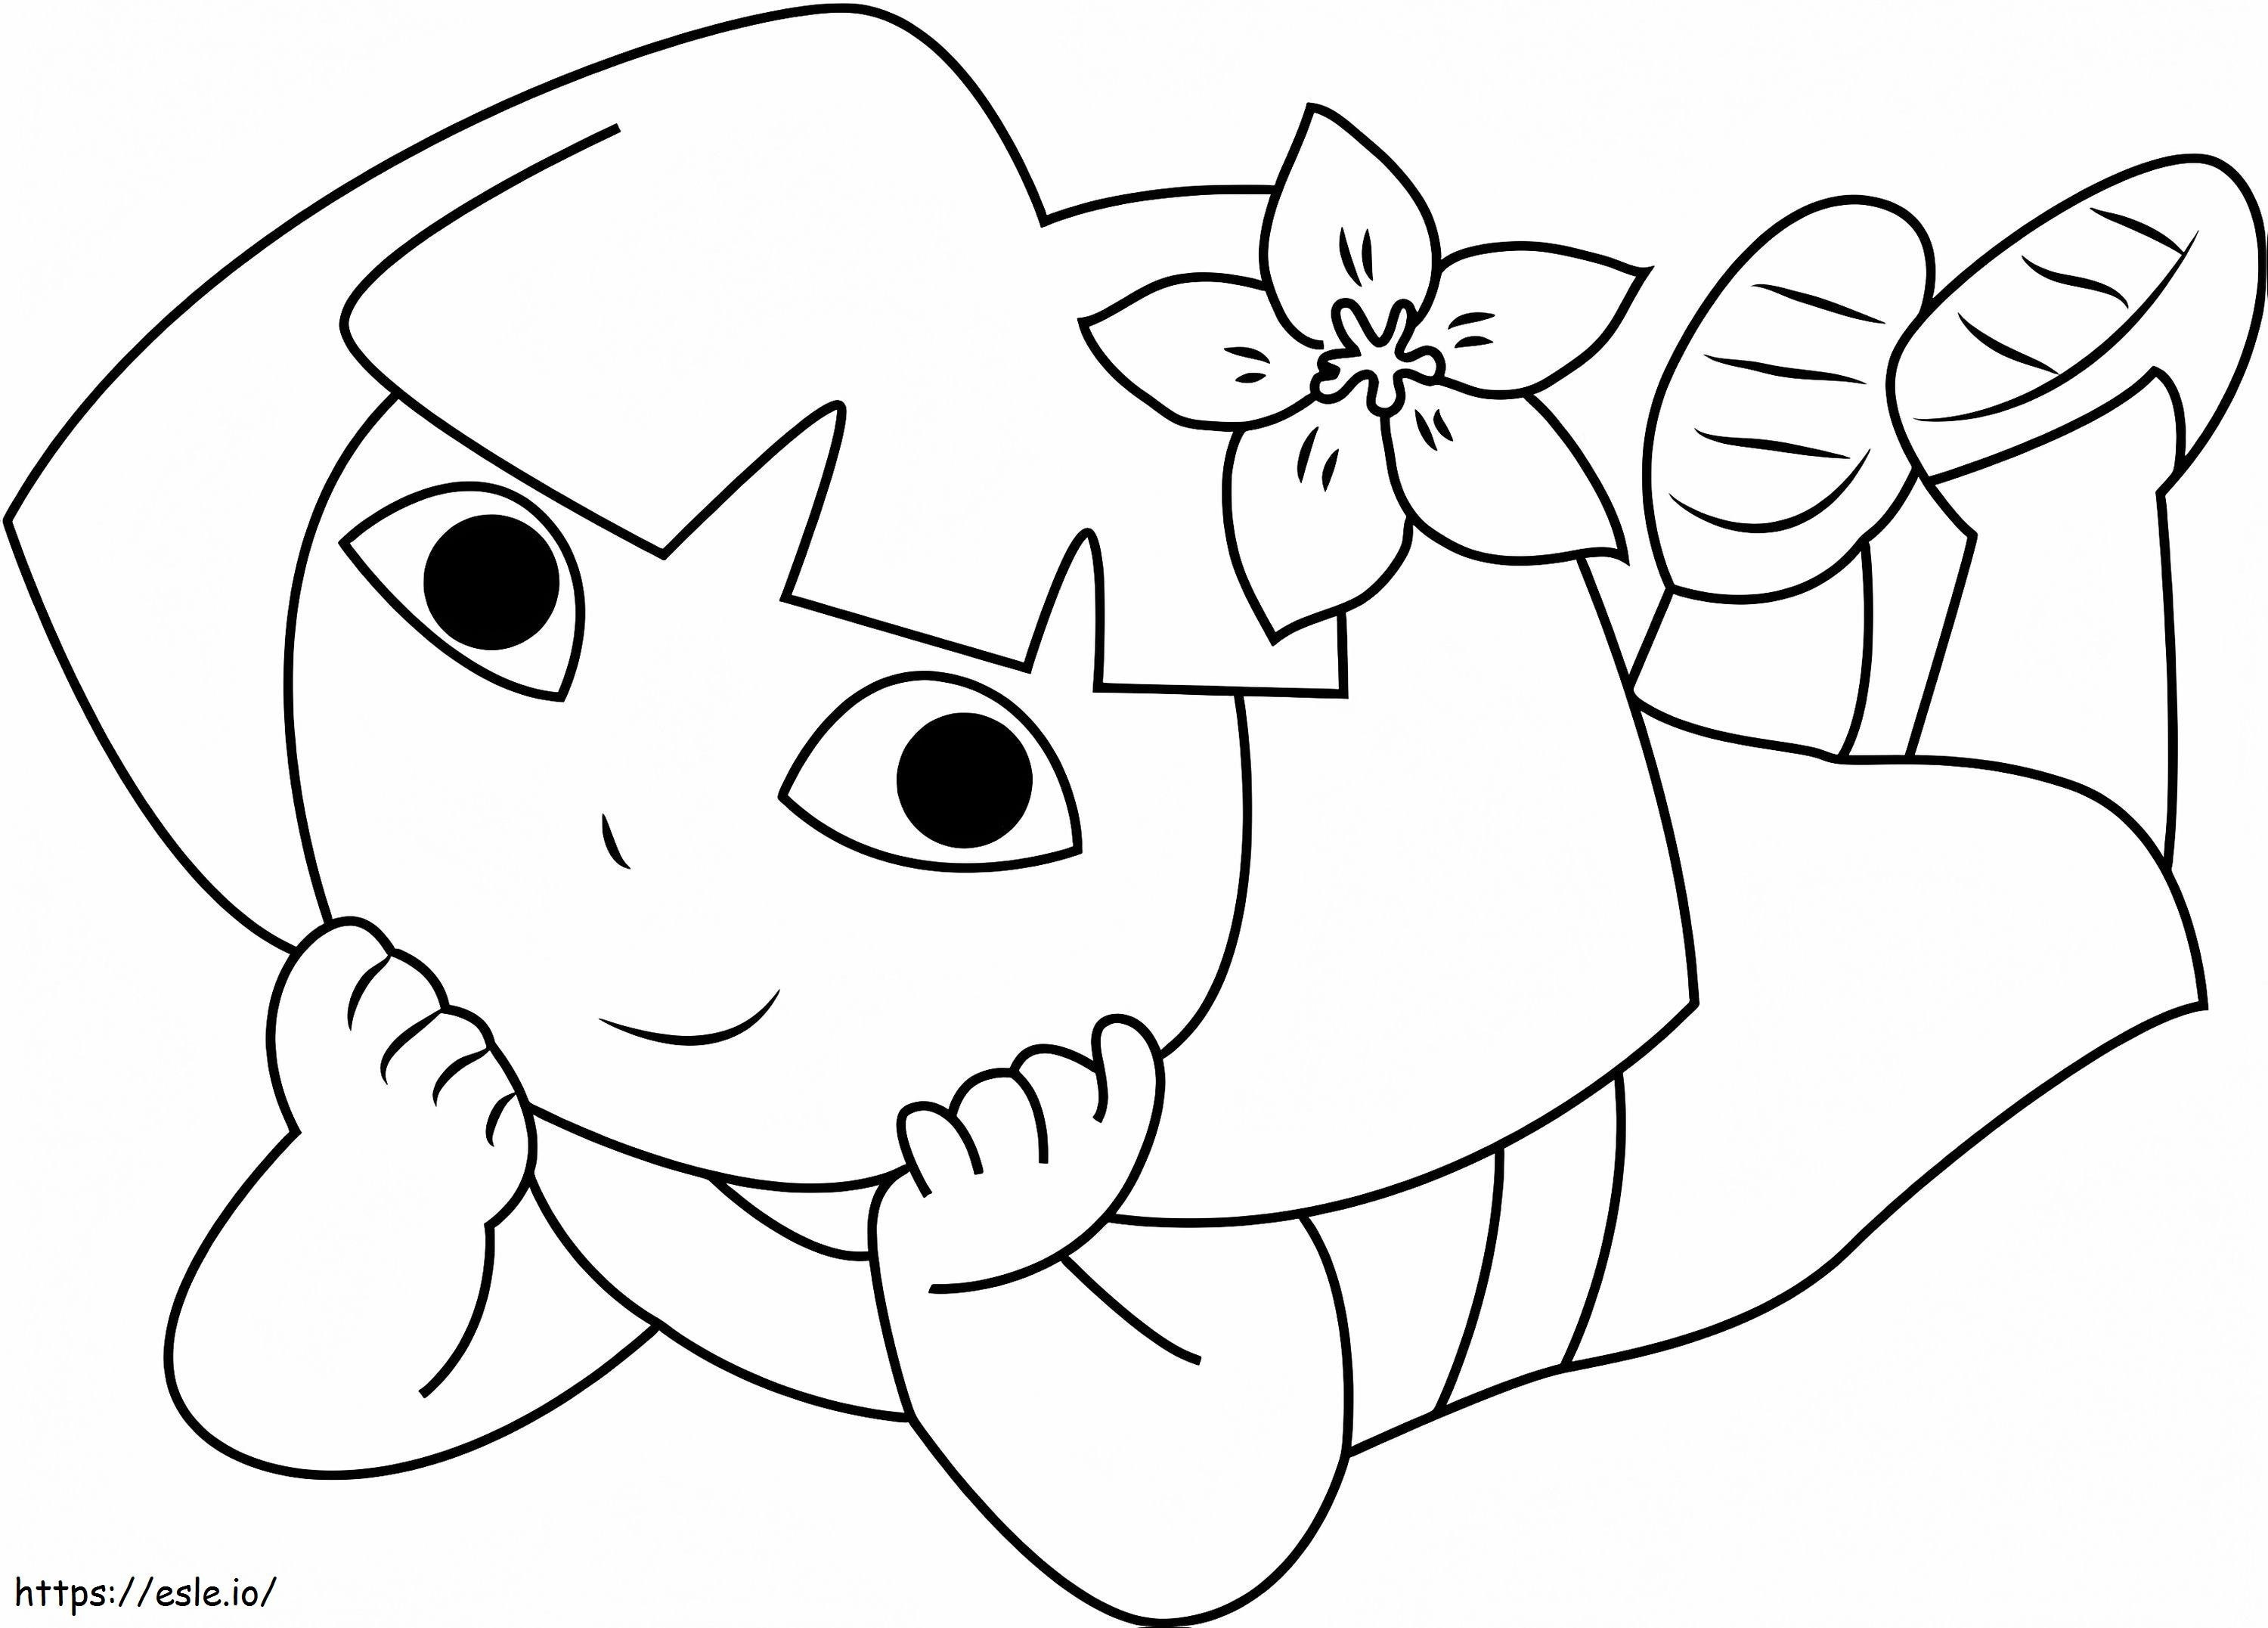 Dora Smiling coloring page